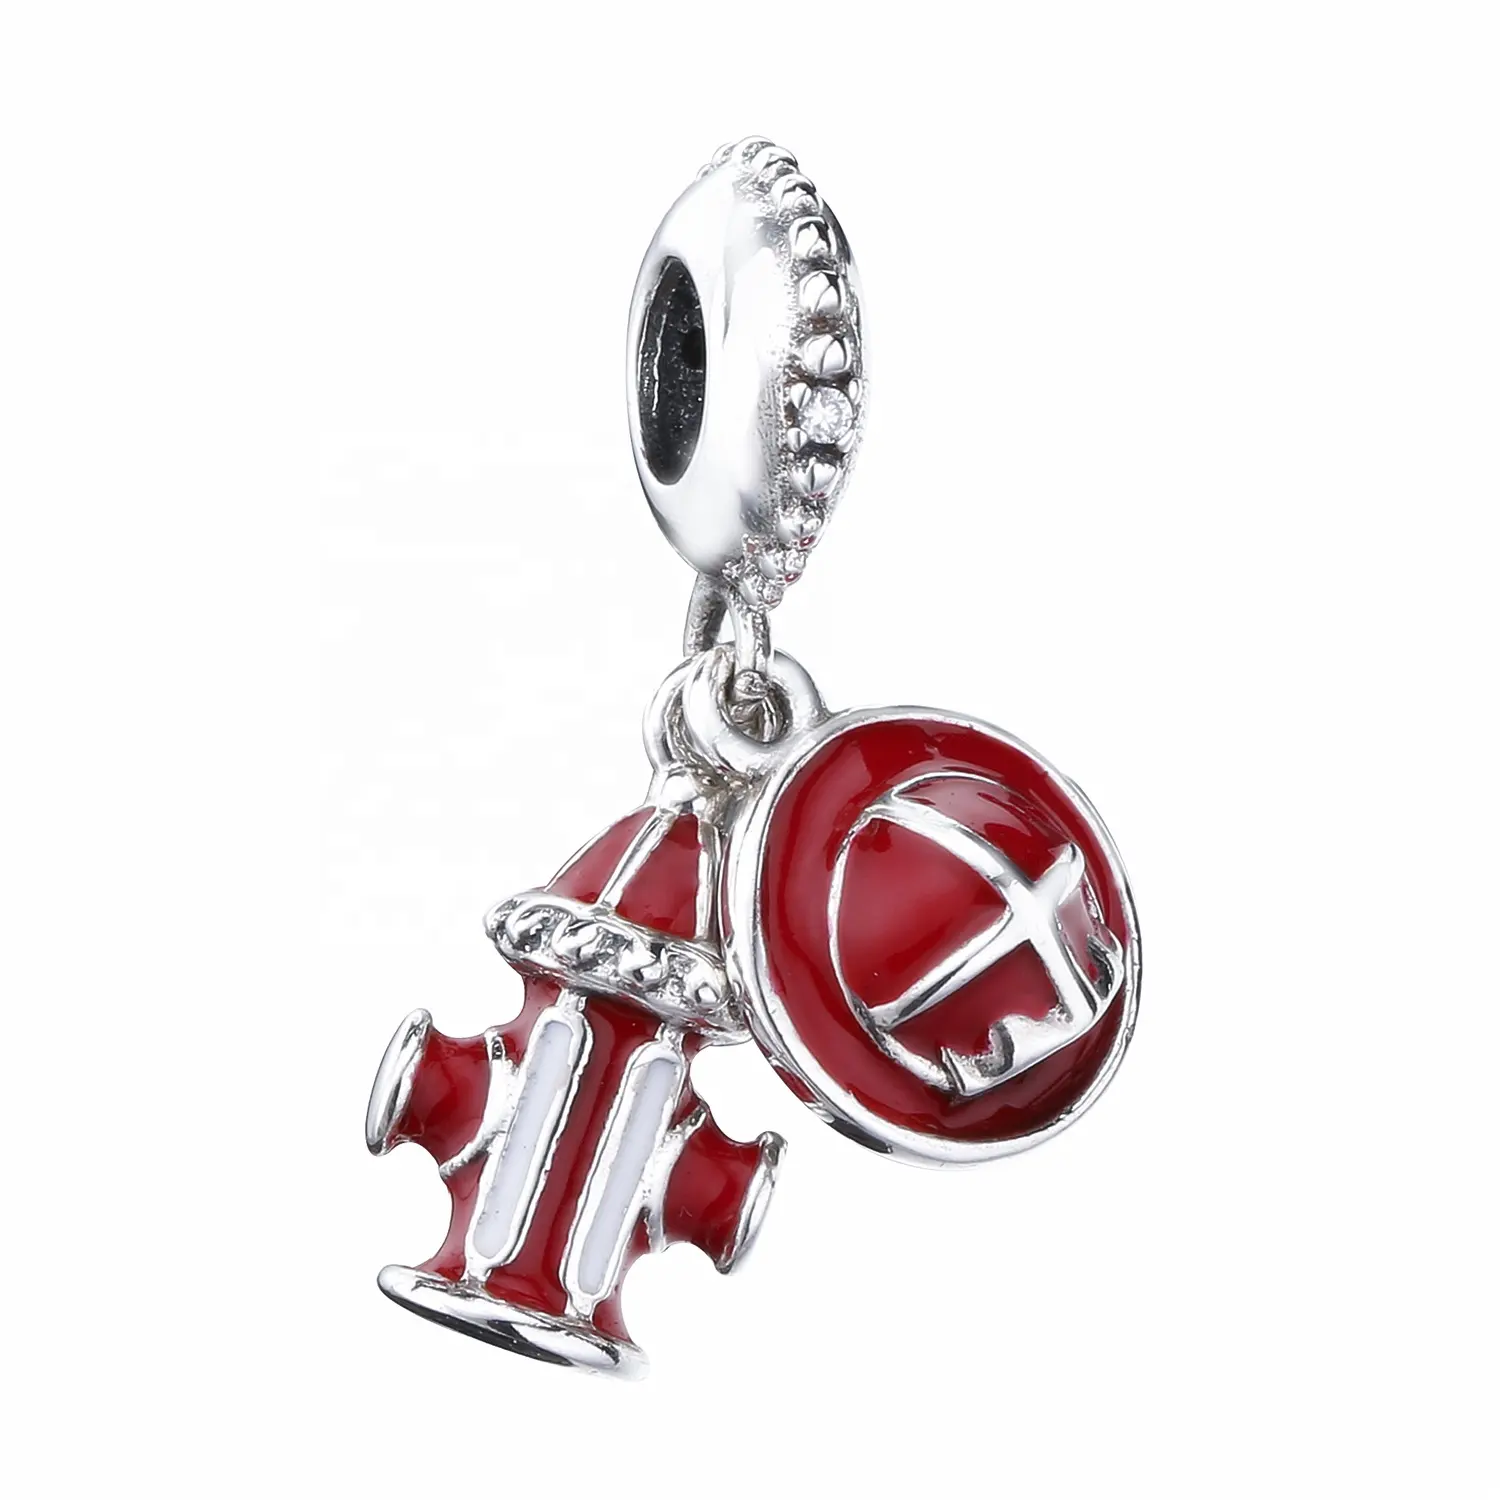 Fire Hat Charm Fire Axe Charm Charms and Pendants Firefighter Charm Wholesale Fire Department Charm Fire figher Pendant